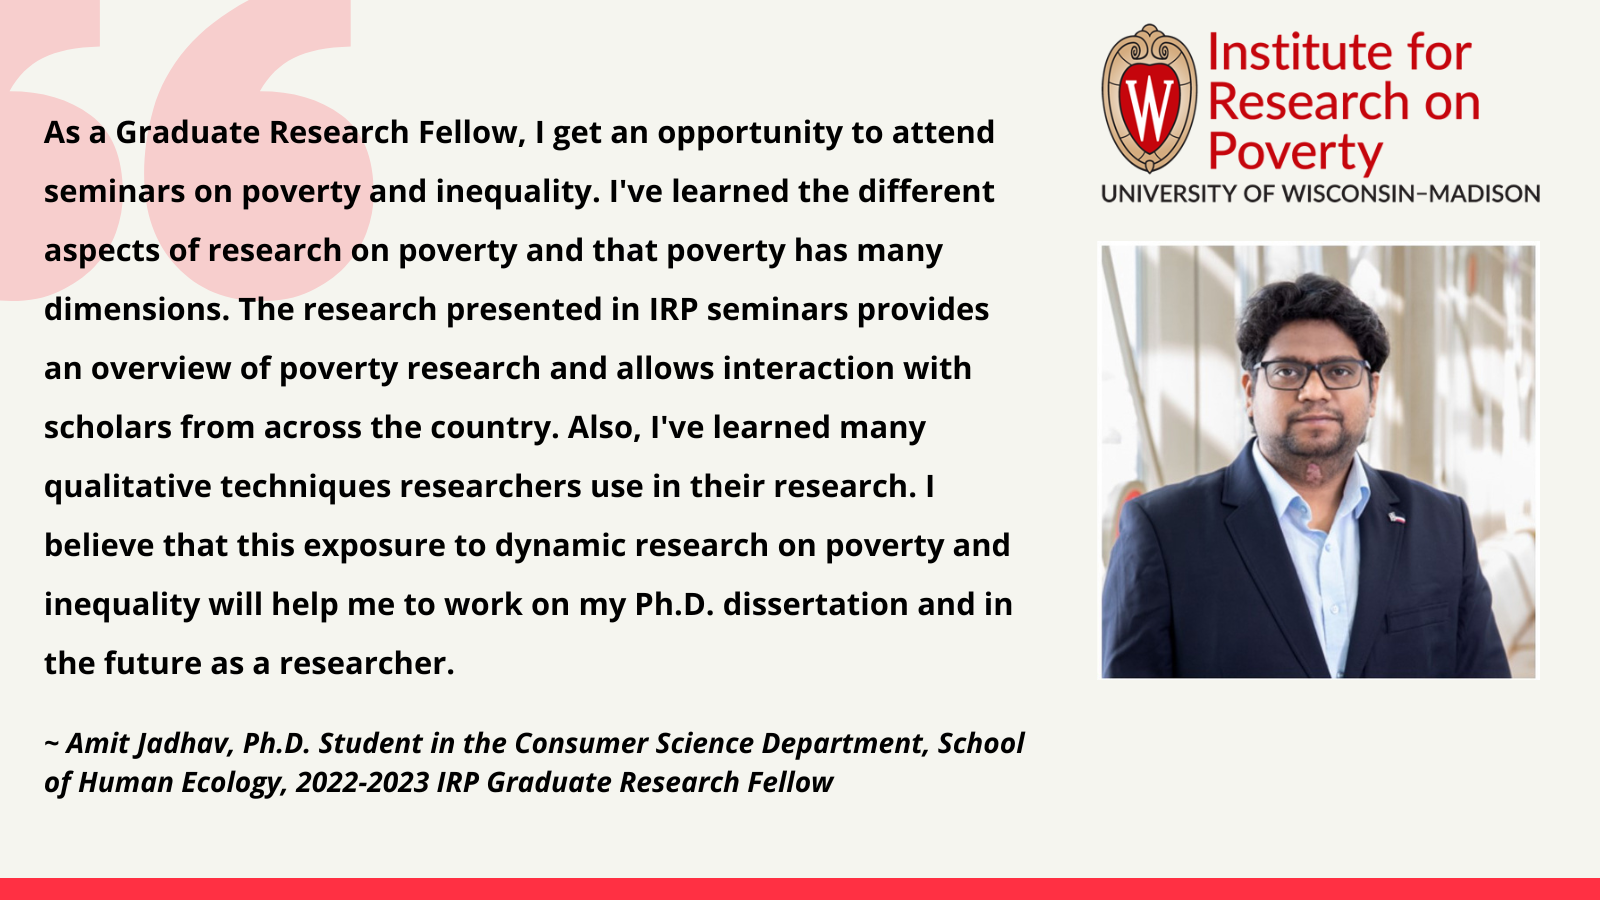 Amit Jadhav, 2022-2023 IRP Graduate Research Fellow: As a Graduate Research Fellow, I get an opportunity to attend seminars on poverty and inequality. I've learned the different aspects of research on poverty and that poverty has many dimensions. The research presented in IRP seminars provides an overview of poverty research and allows interaction with scholars from across the country. Also, I've learned many qualitative techniques researchers use in their research. I believe that this exposure to dynamic research on poverty and inequality will help me to work on my Ph.D. dissertation and in the future as a researcher.